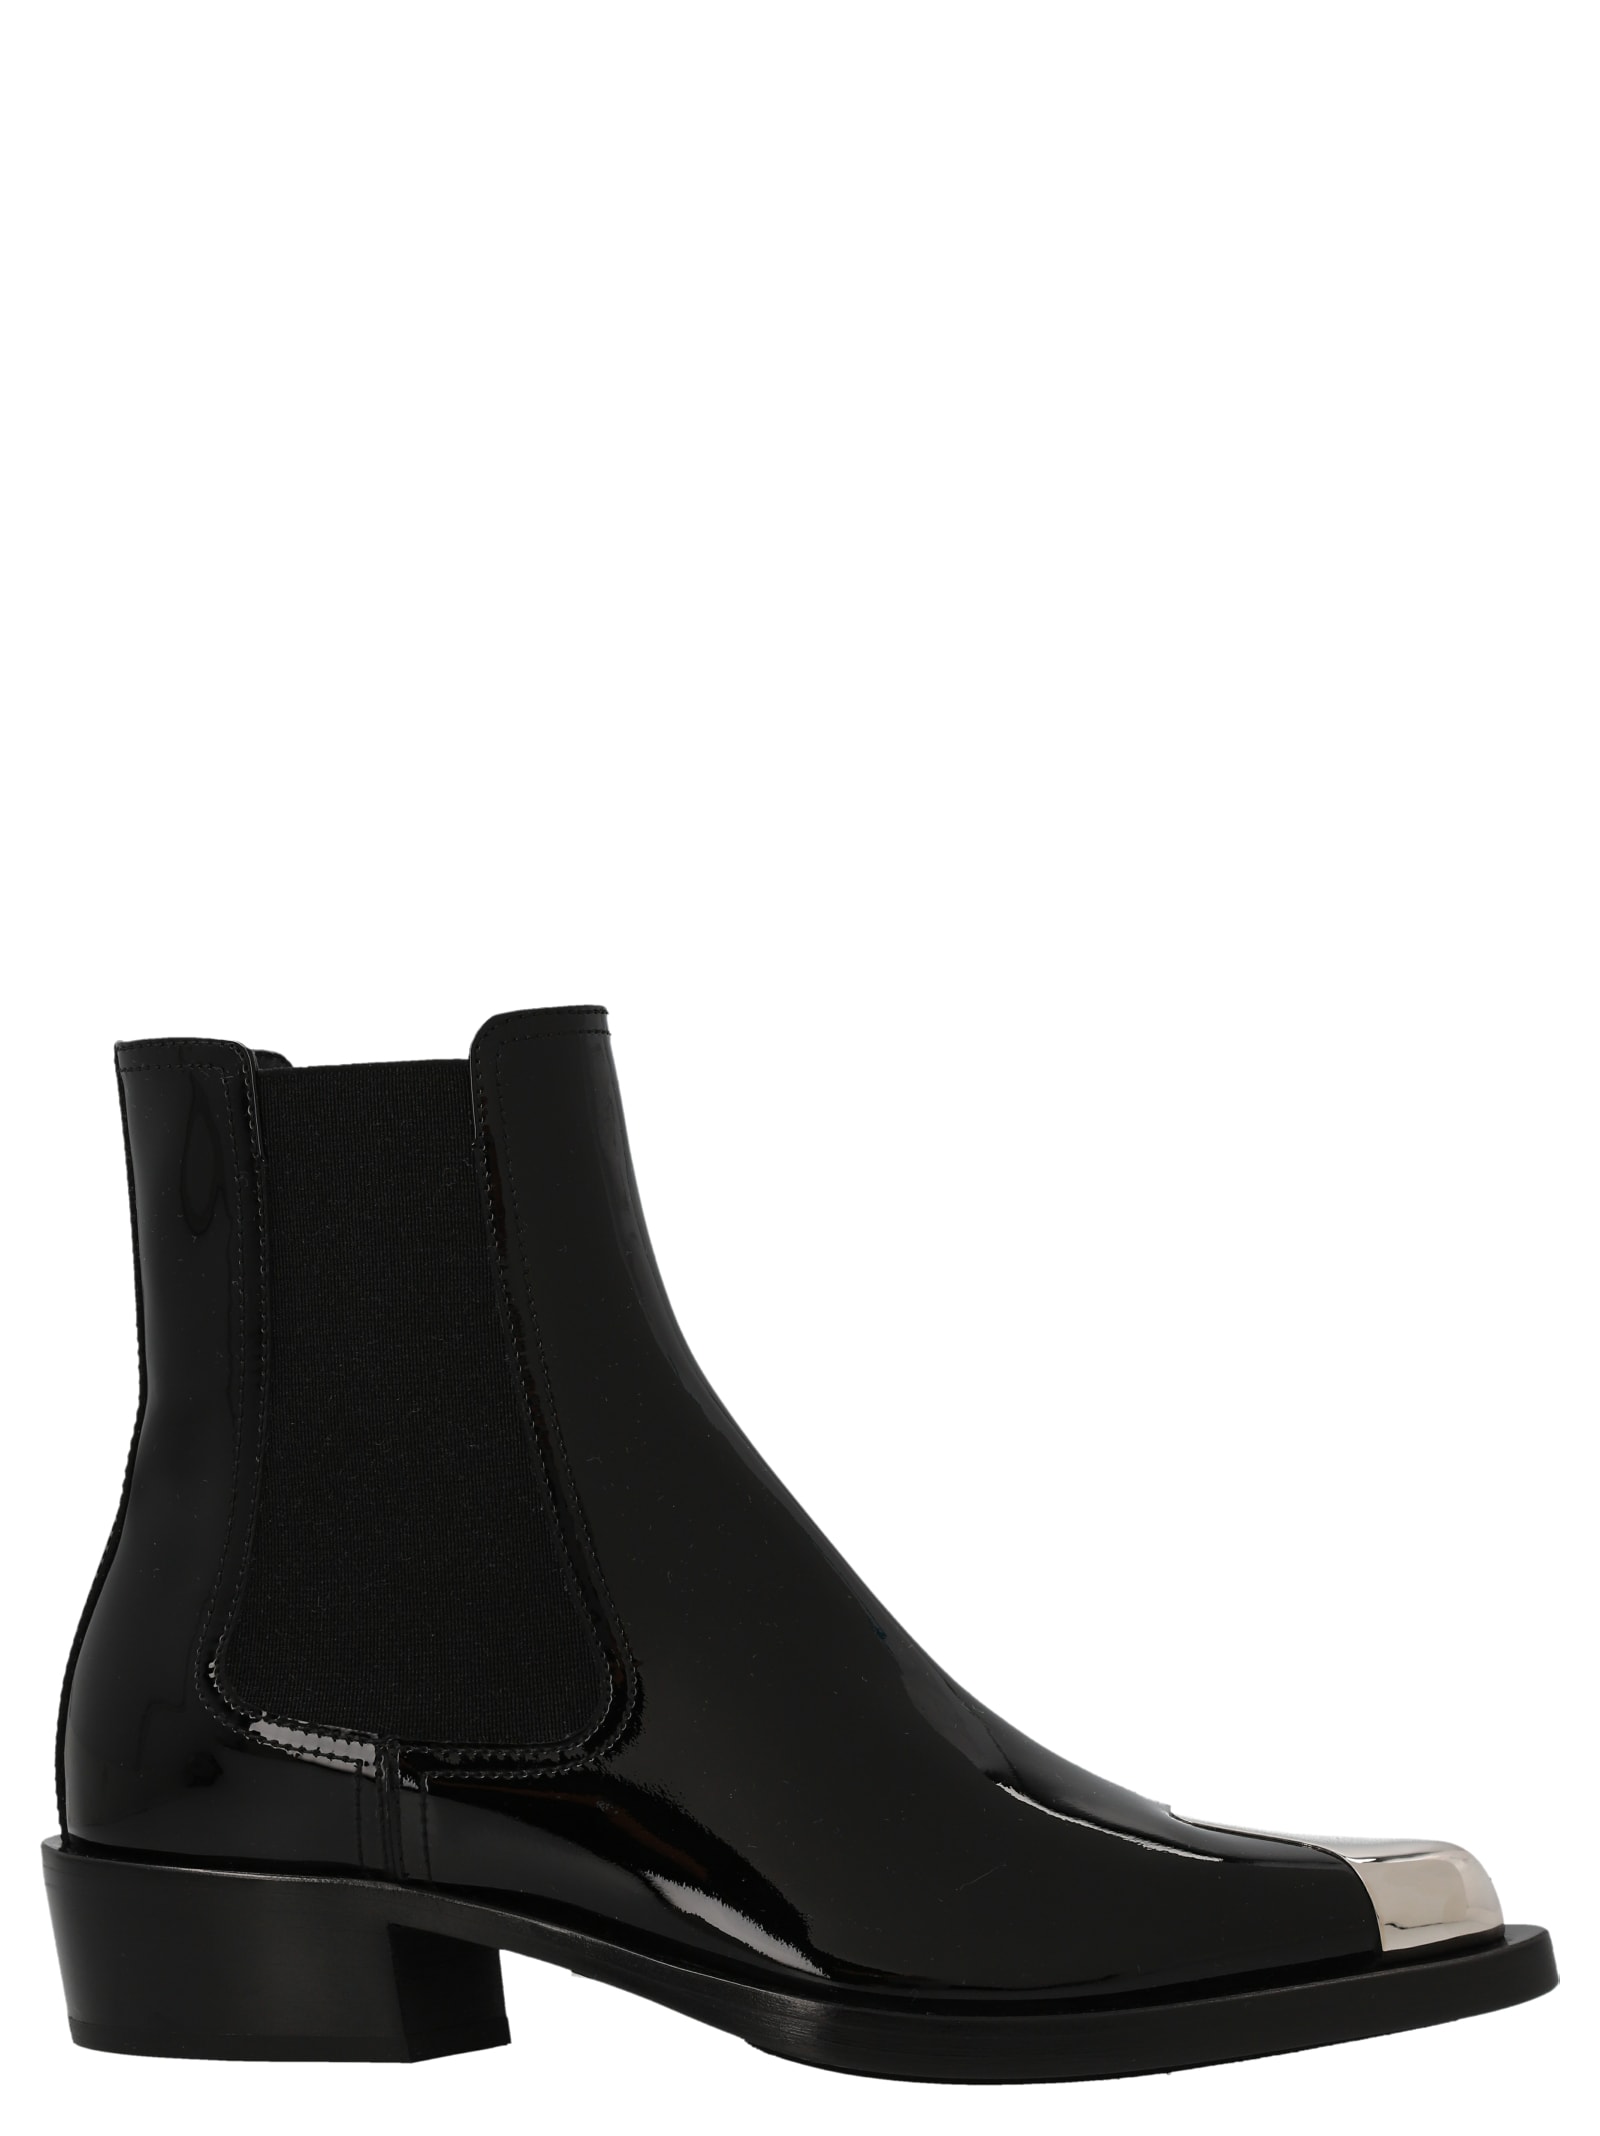 ALEXANDER MCQUEEN PATENT ANKLE BOOTS